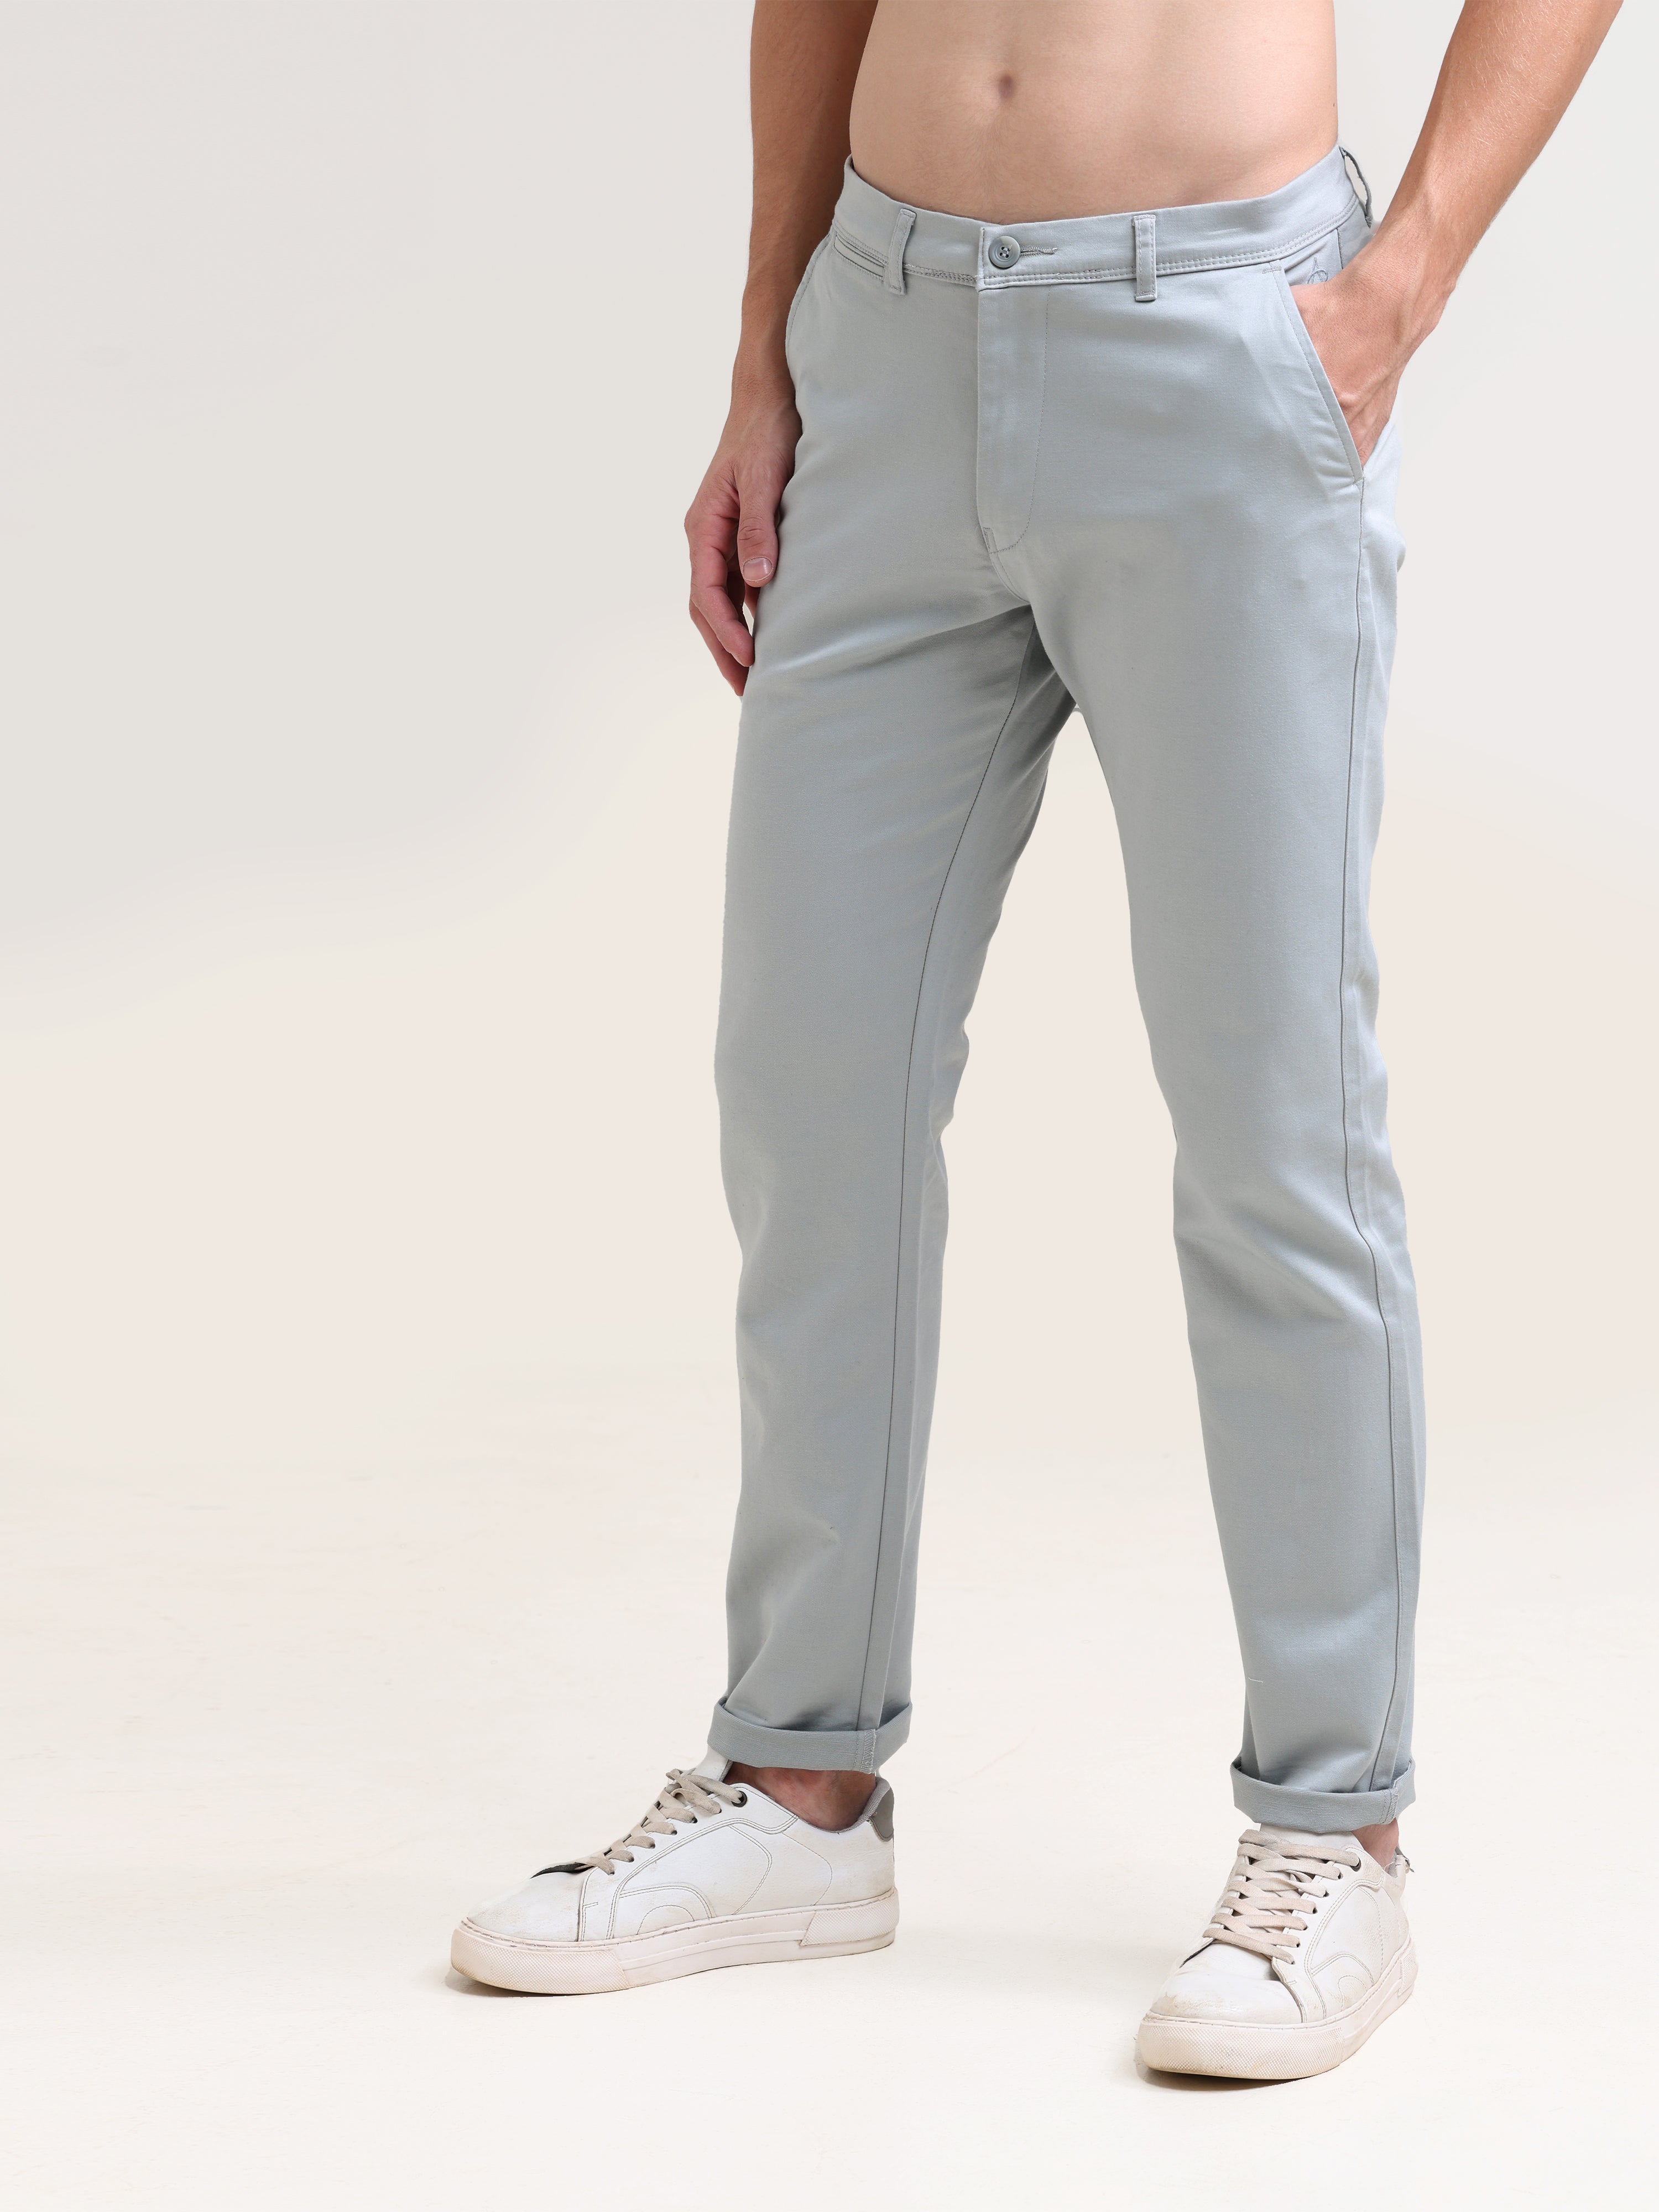 Teal Ease: Solid Comfort Fit Cotton Pants